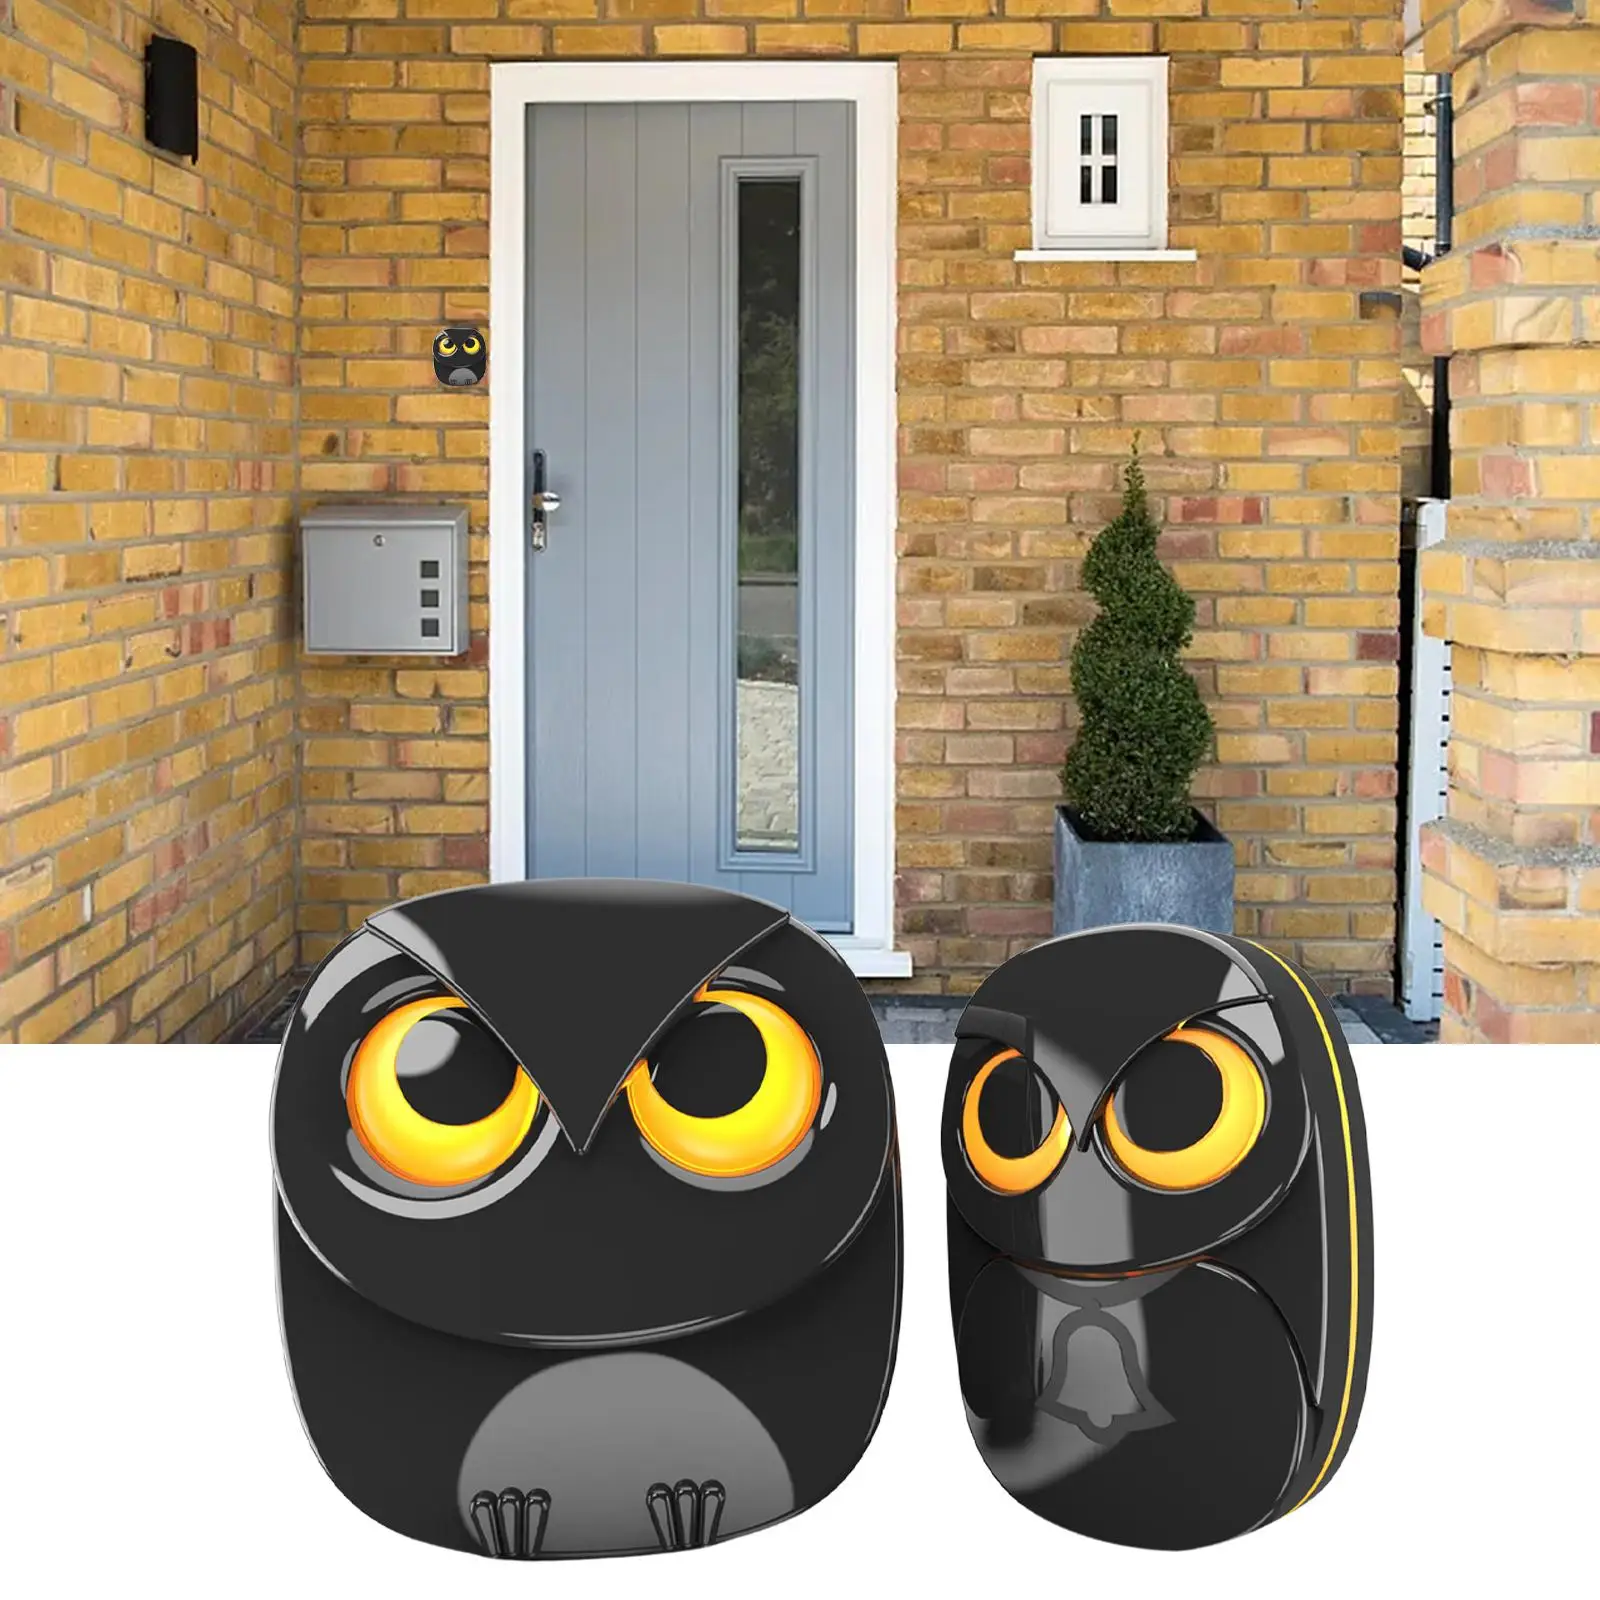 Wireless Driveway Security Alarm Simple to Use Fitments Sturdy Waterproof Doorbell for Front Porch Garage Outside AU Plug